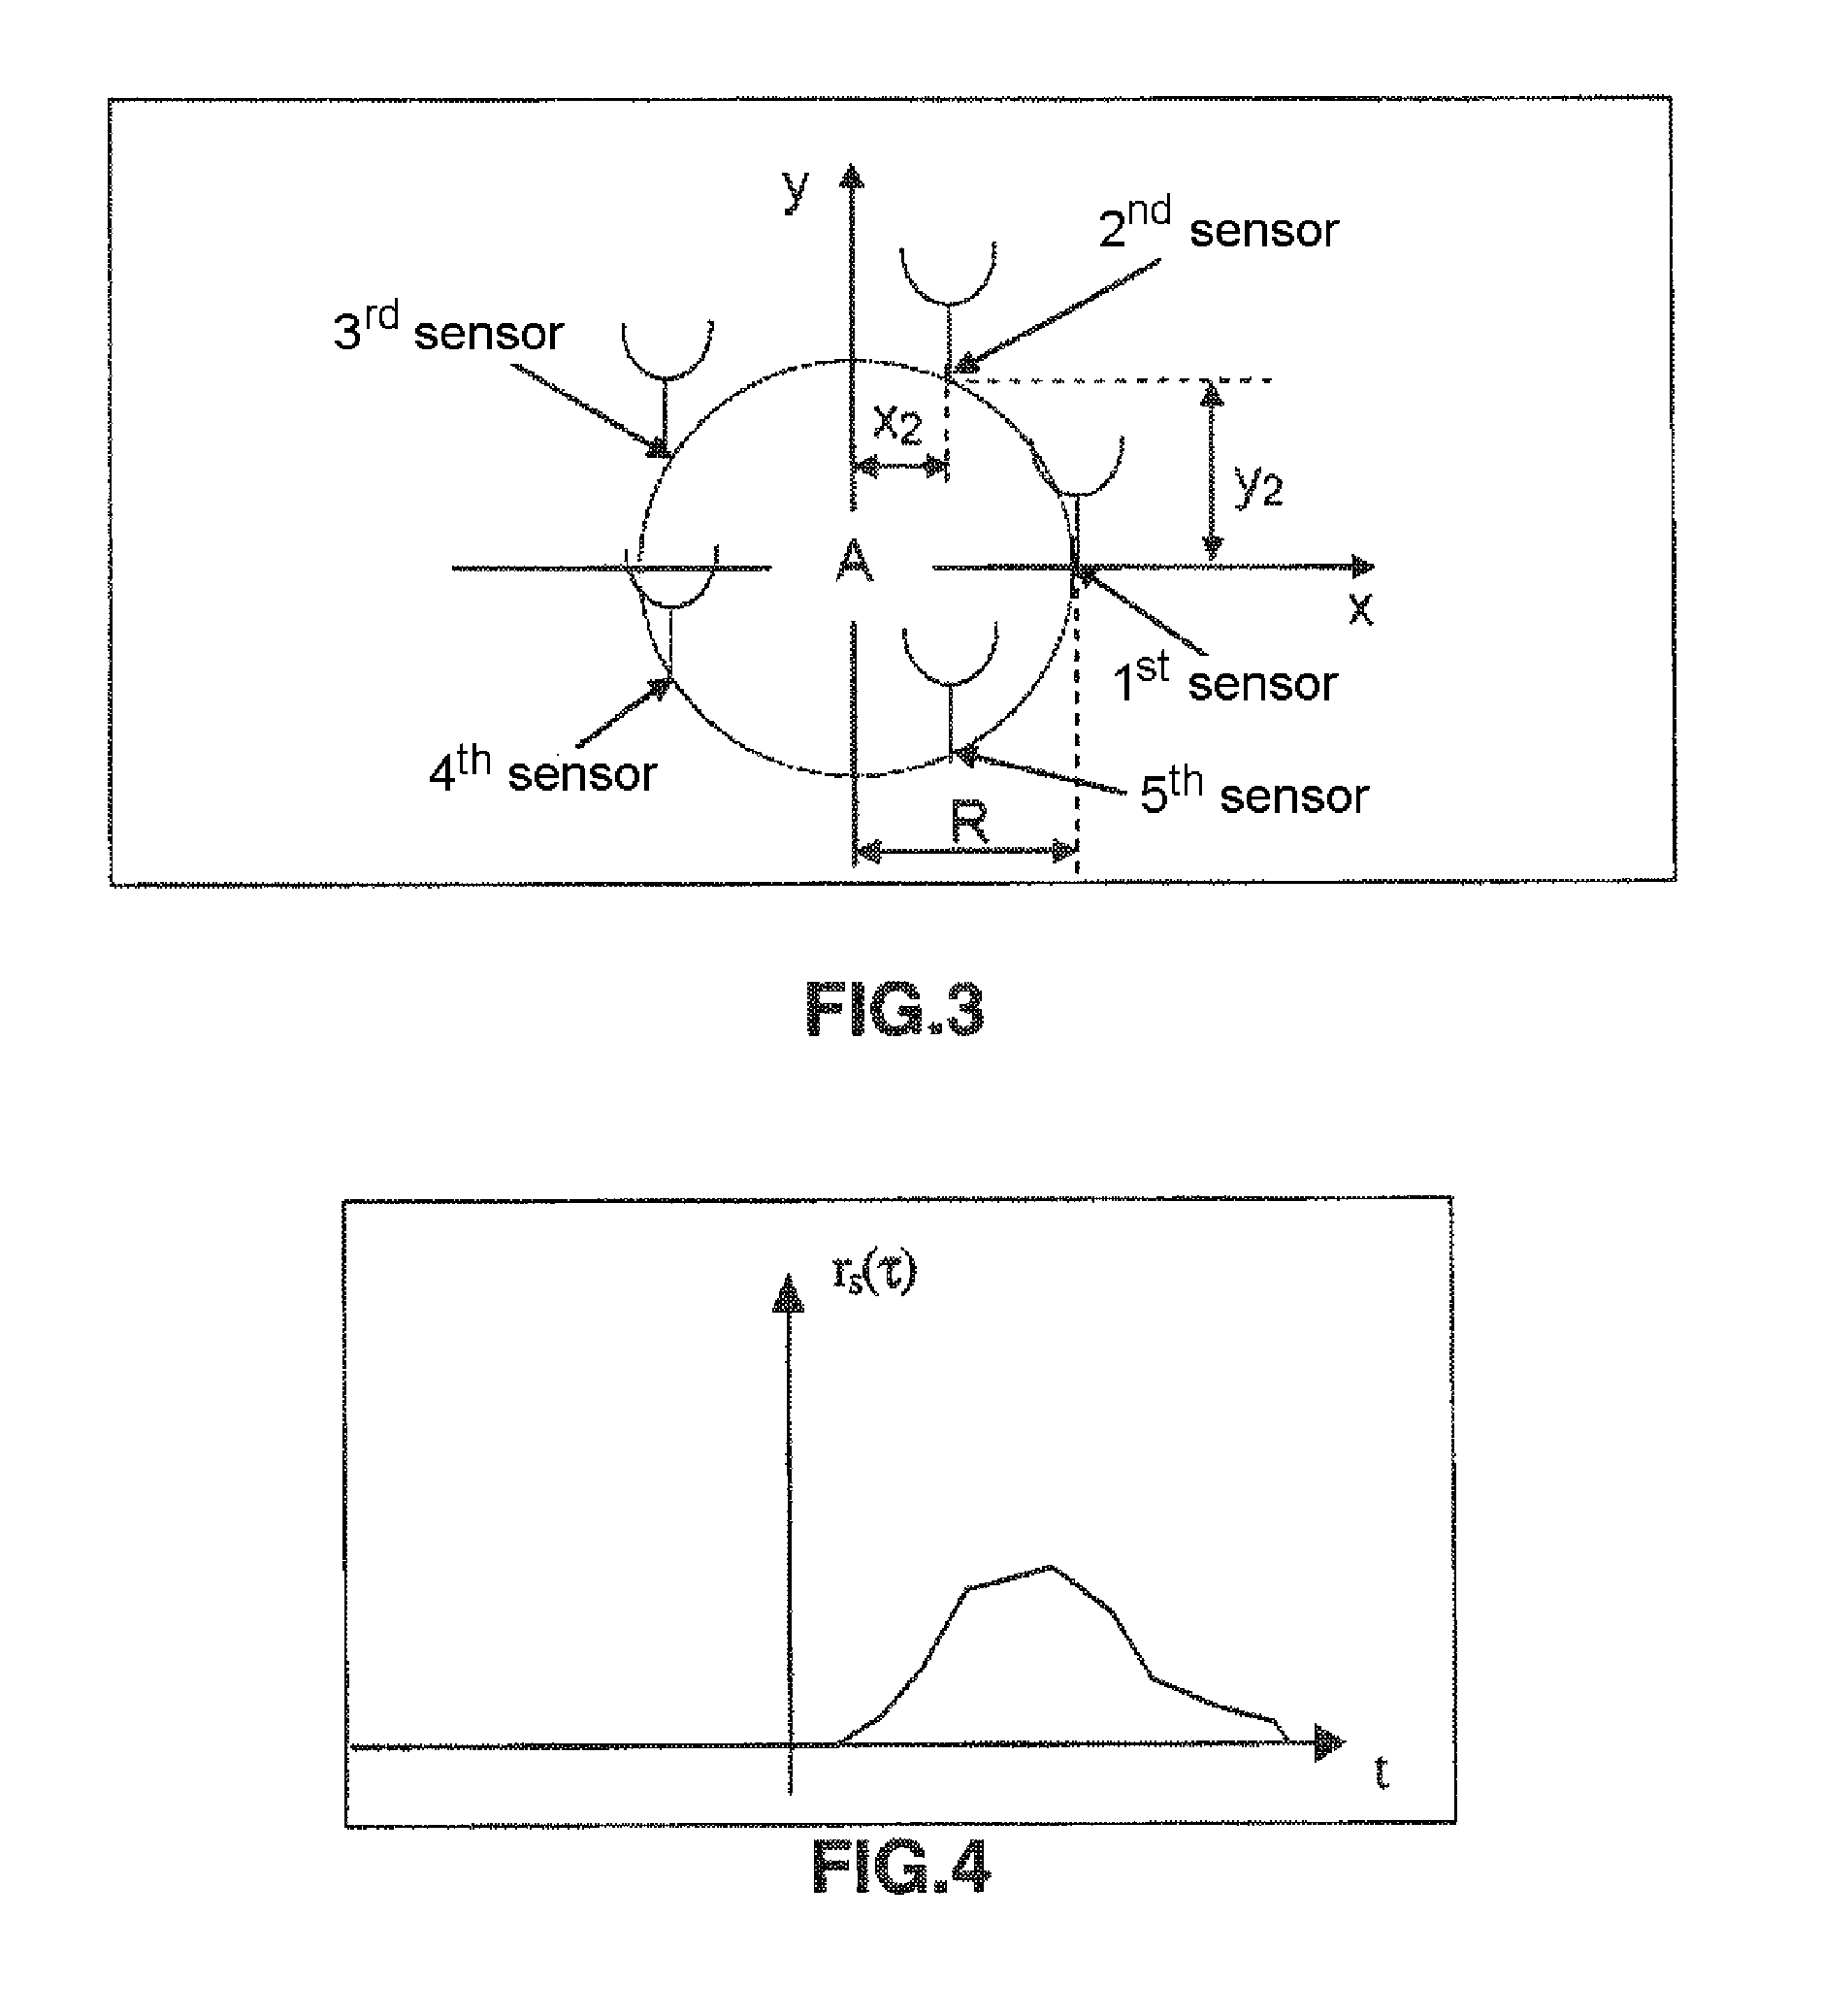 Method for locating a source by multi-channel estimation of the TDOA and FDOA of its multipath components with or without AOA